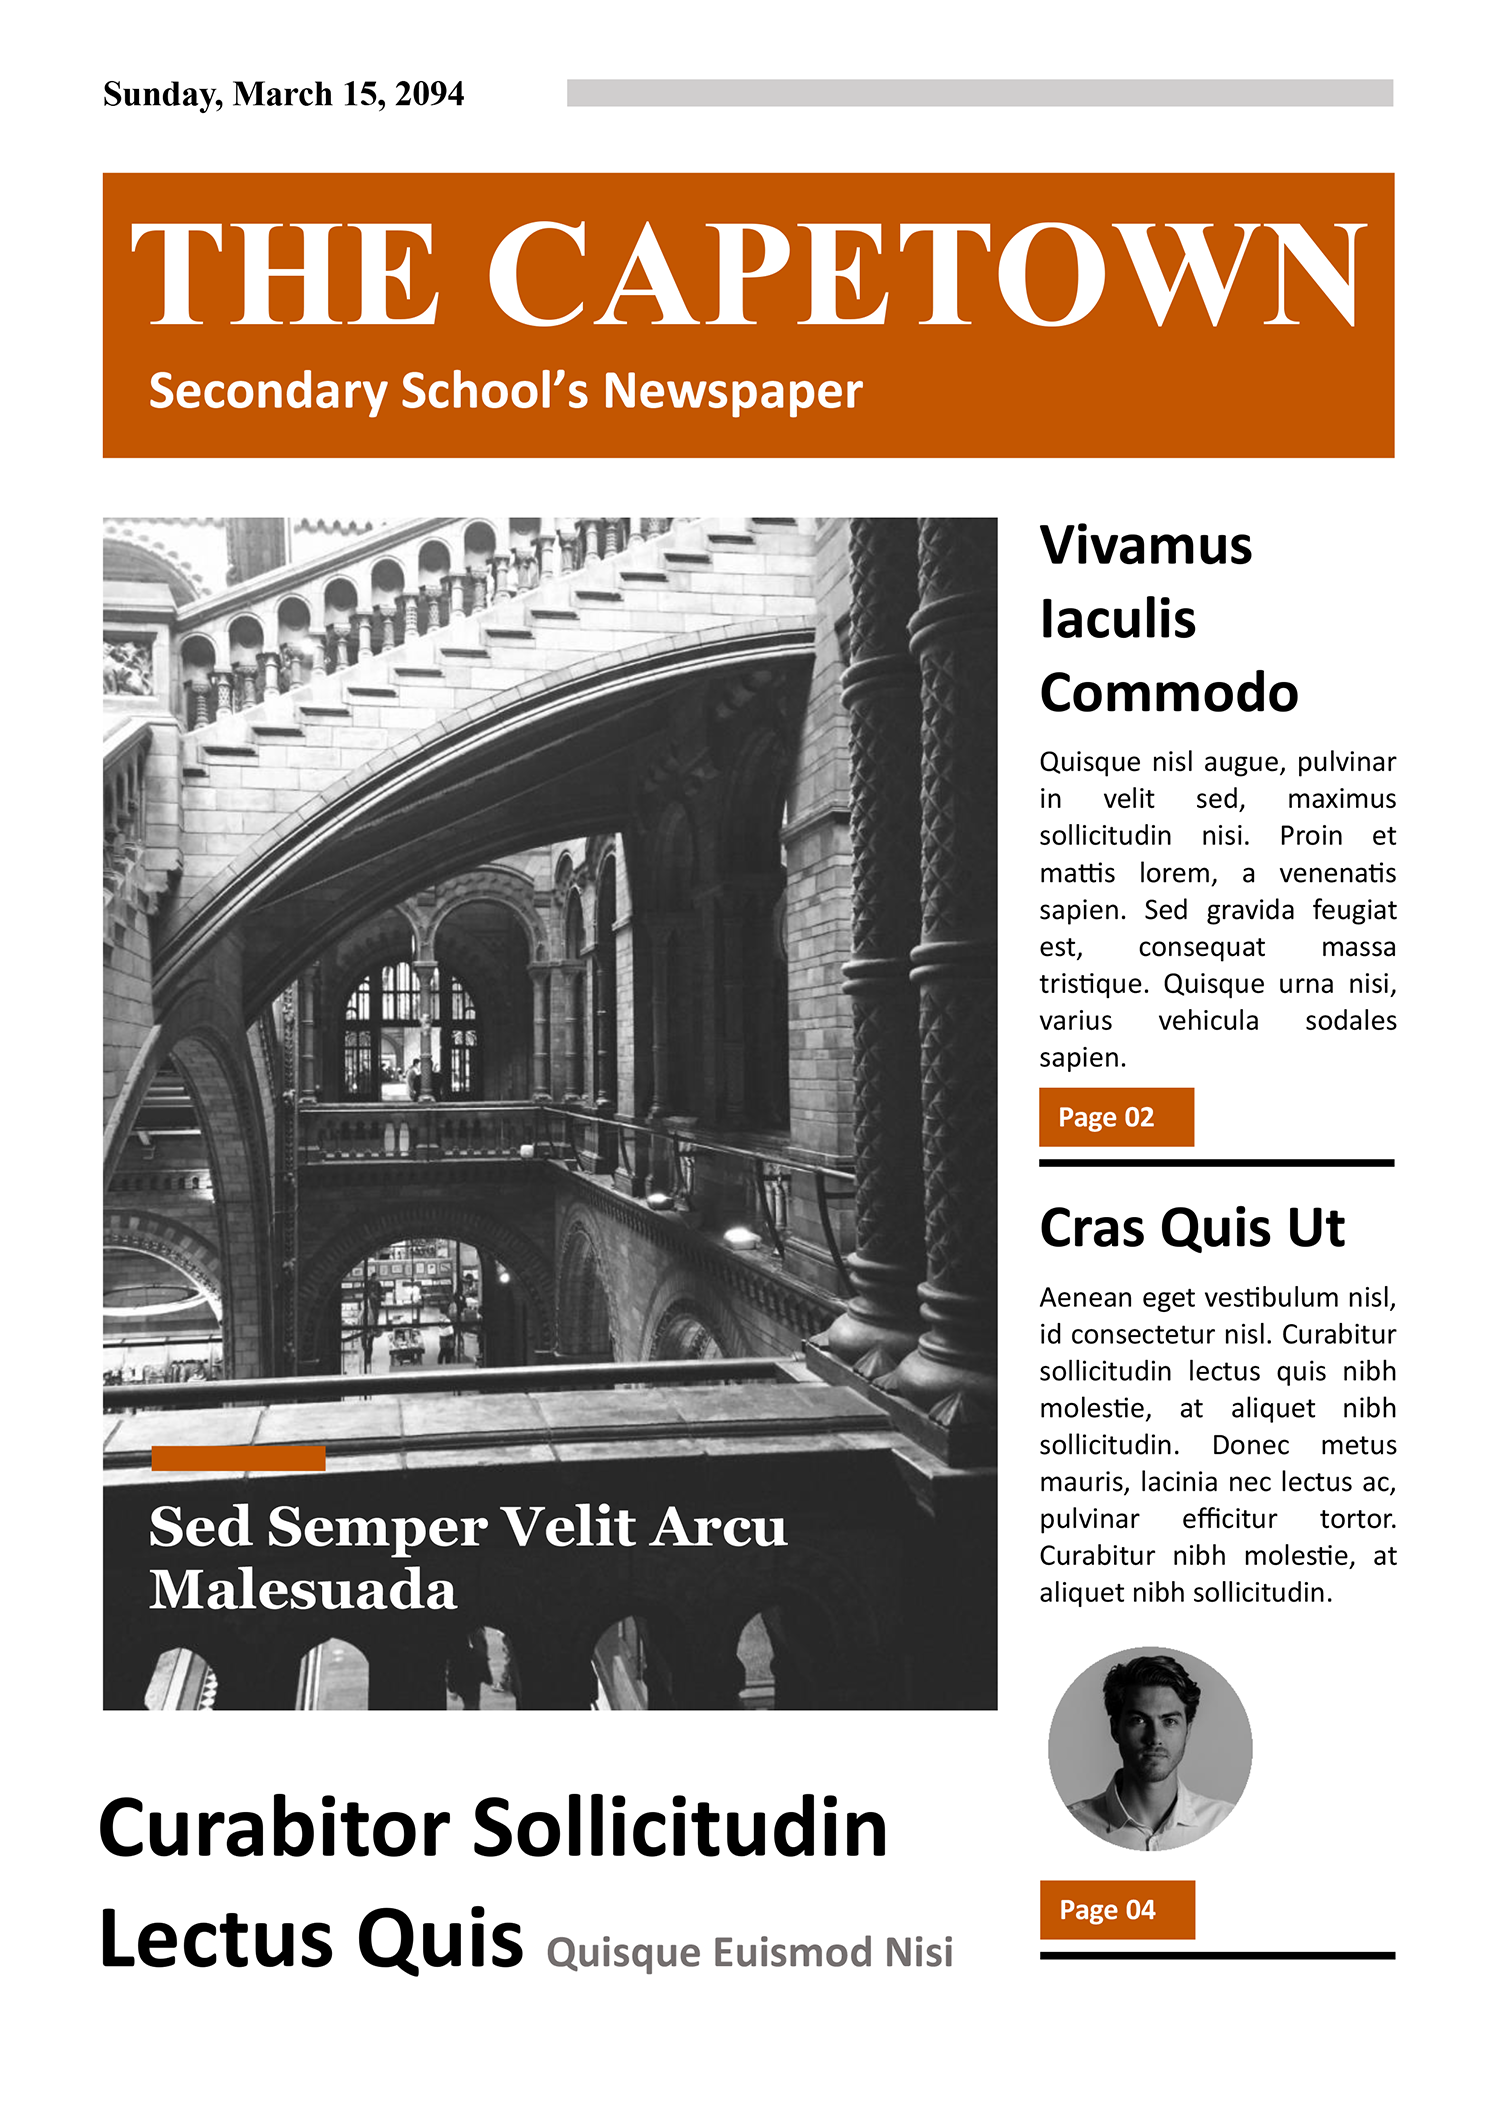 Editable Newspaper Article Template for Students - Page 01